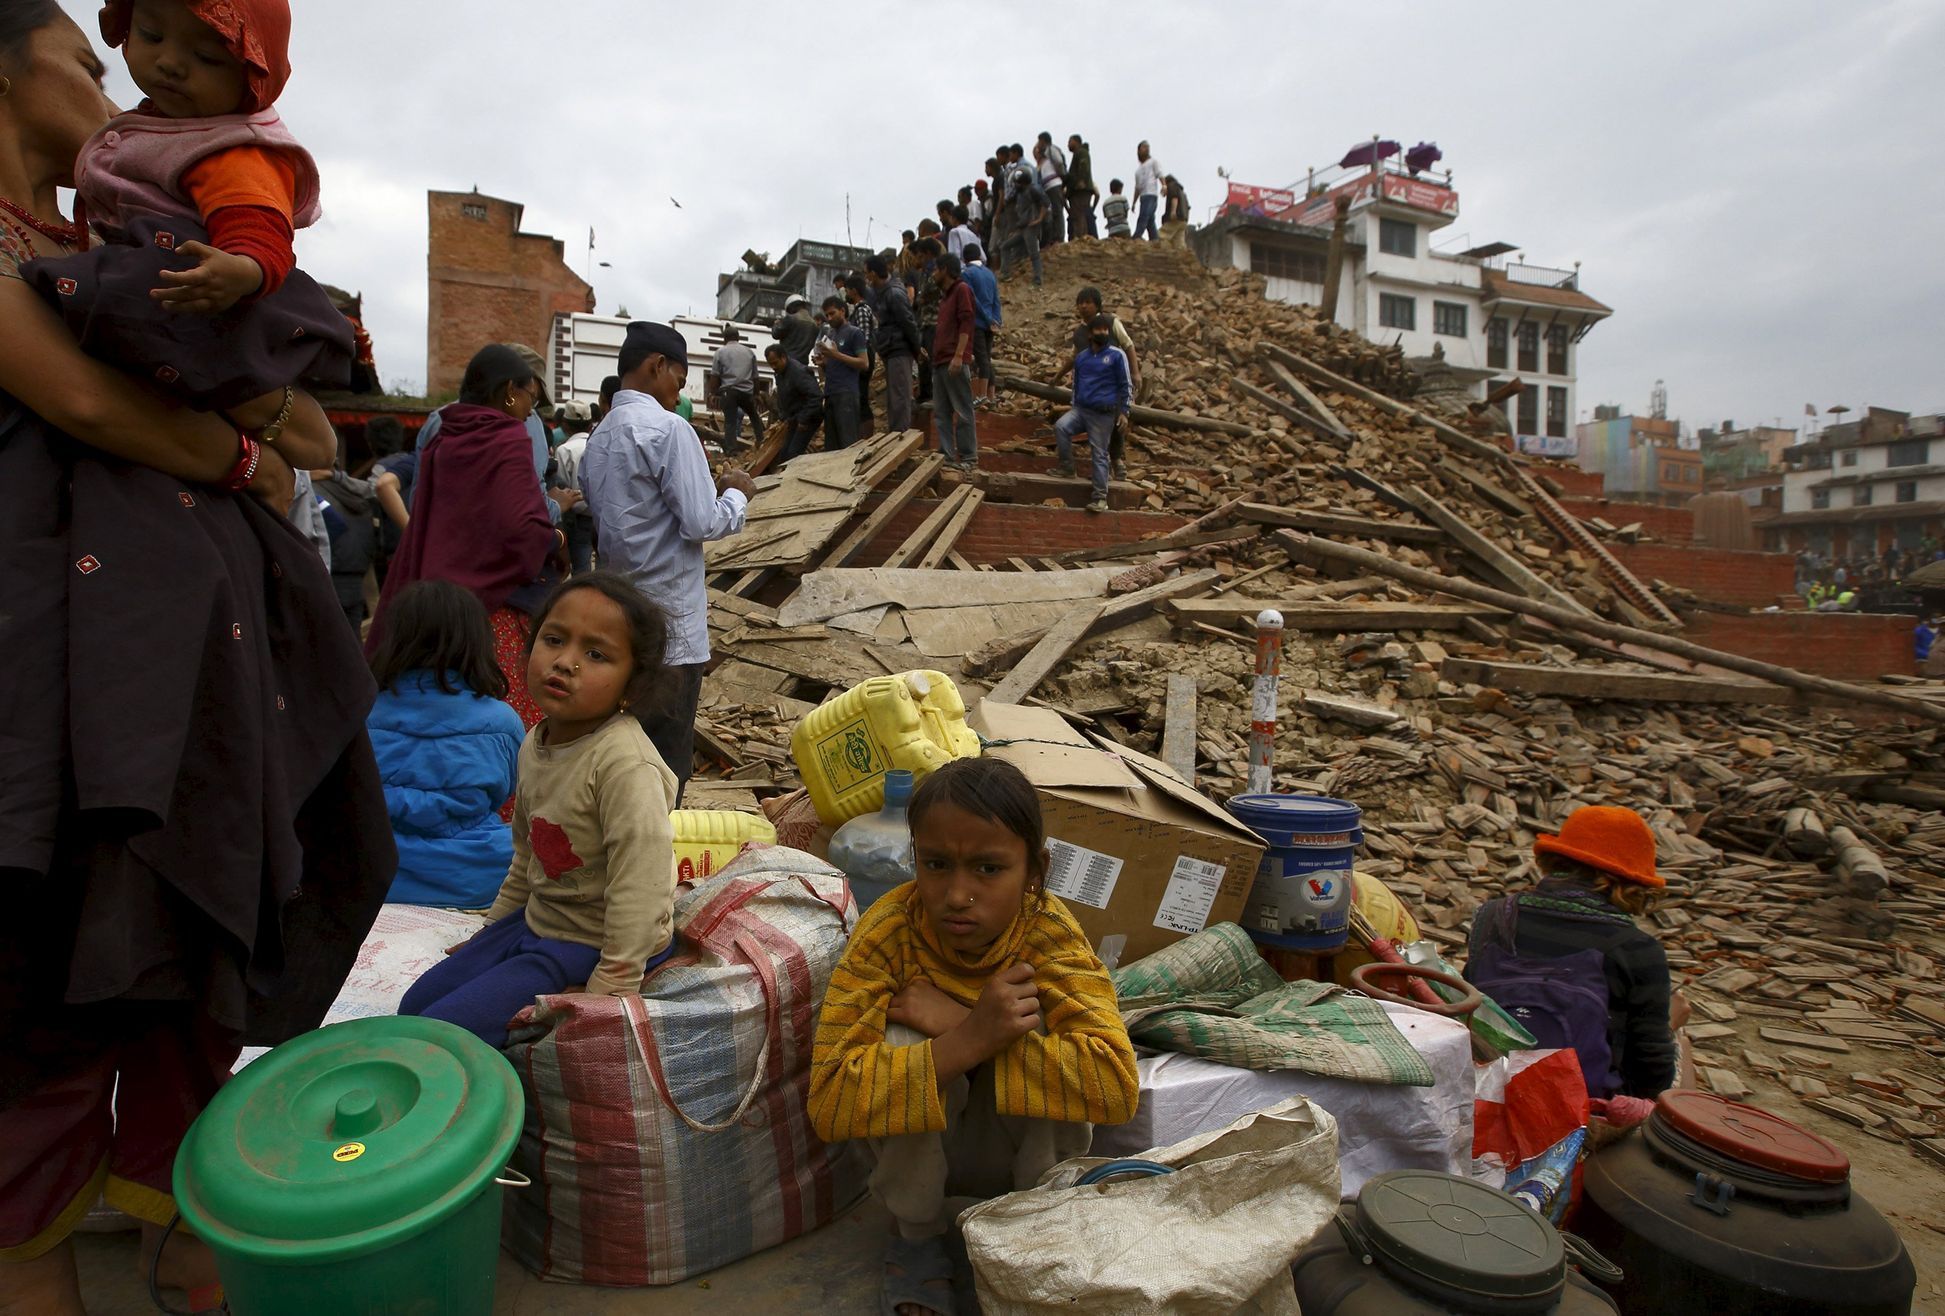 People sit with their belongings outside a damaged temple in Bashantapur Durbar Square after a major earthquake hit Kathmandu